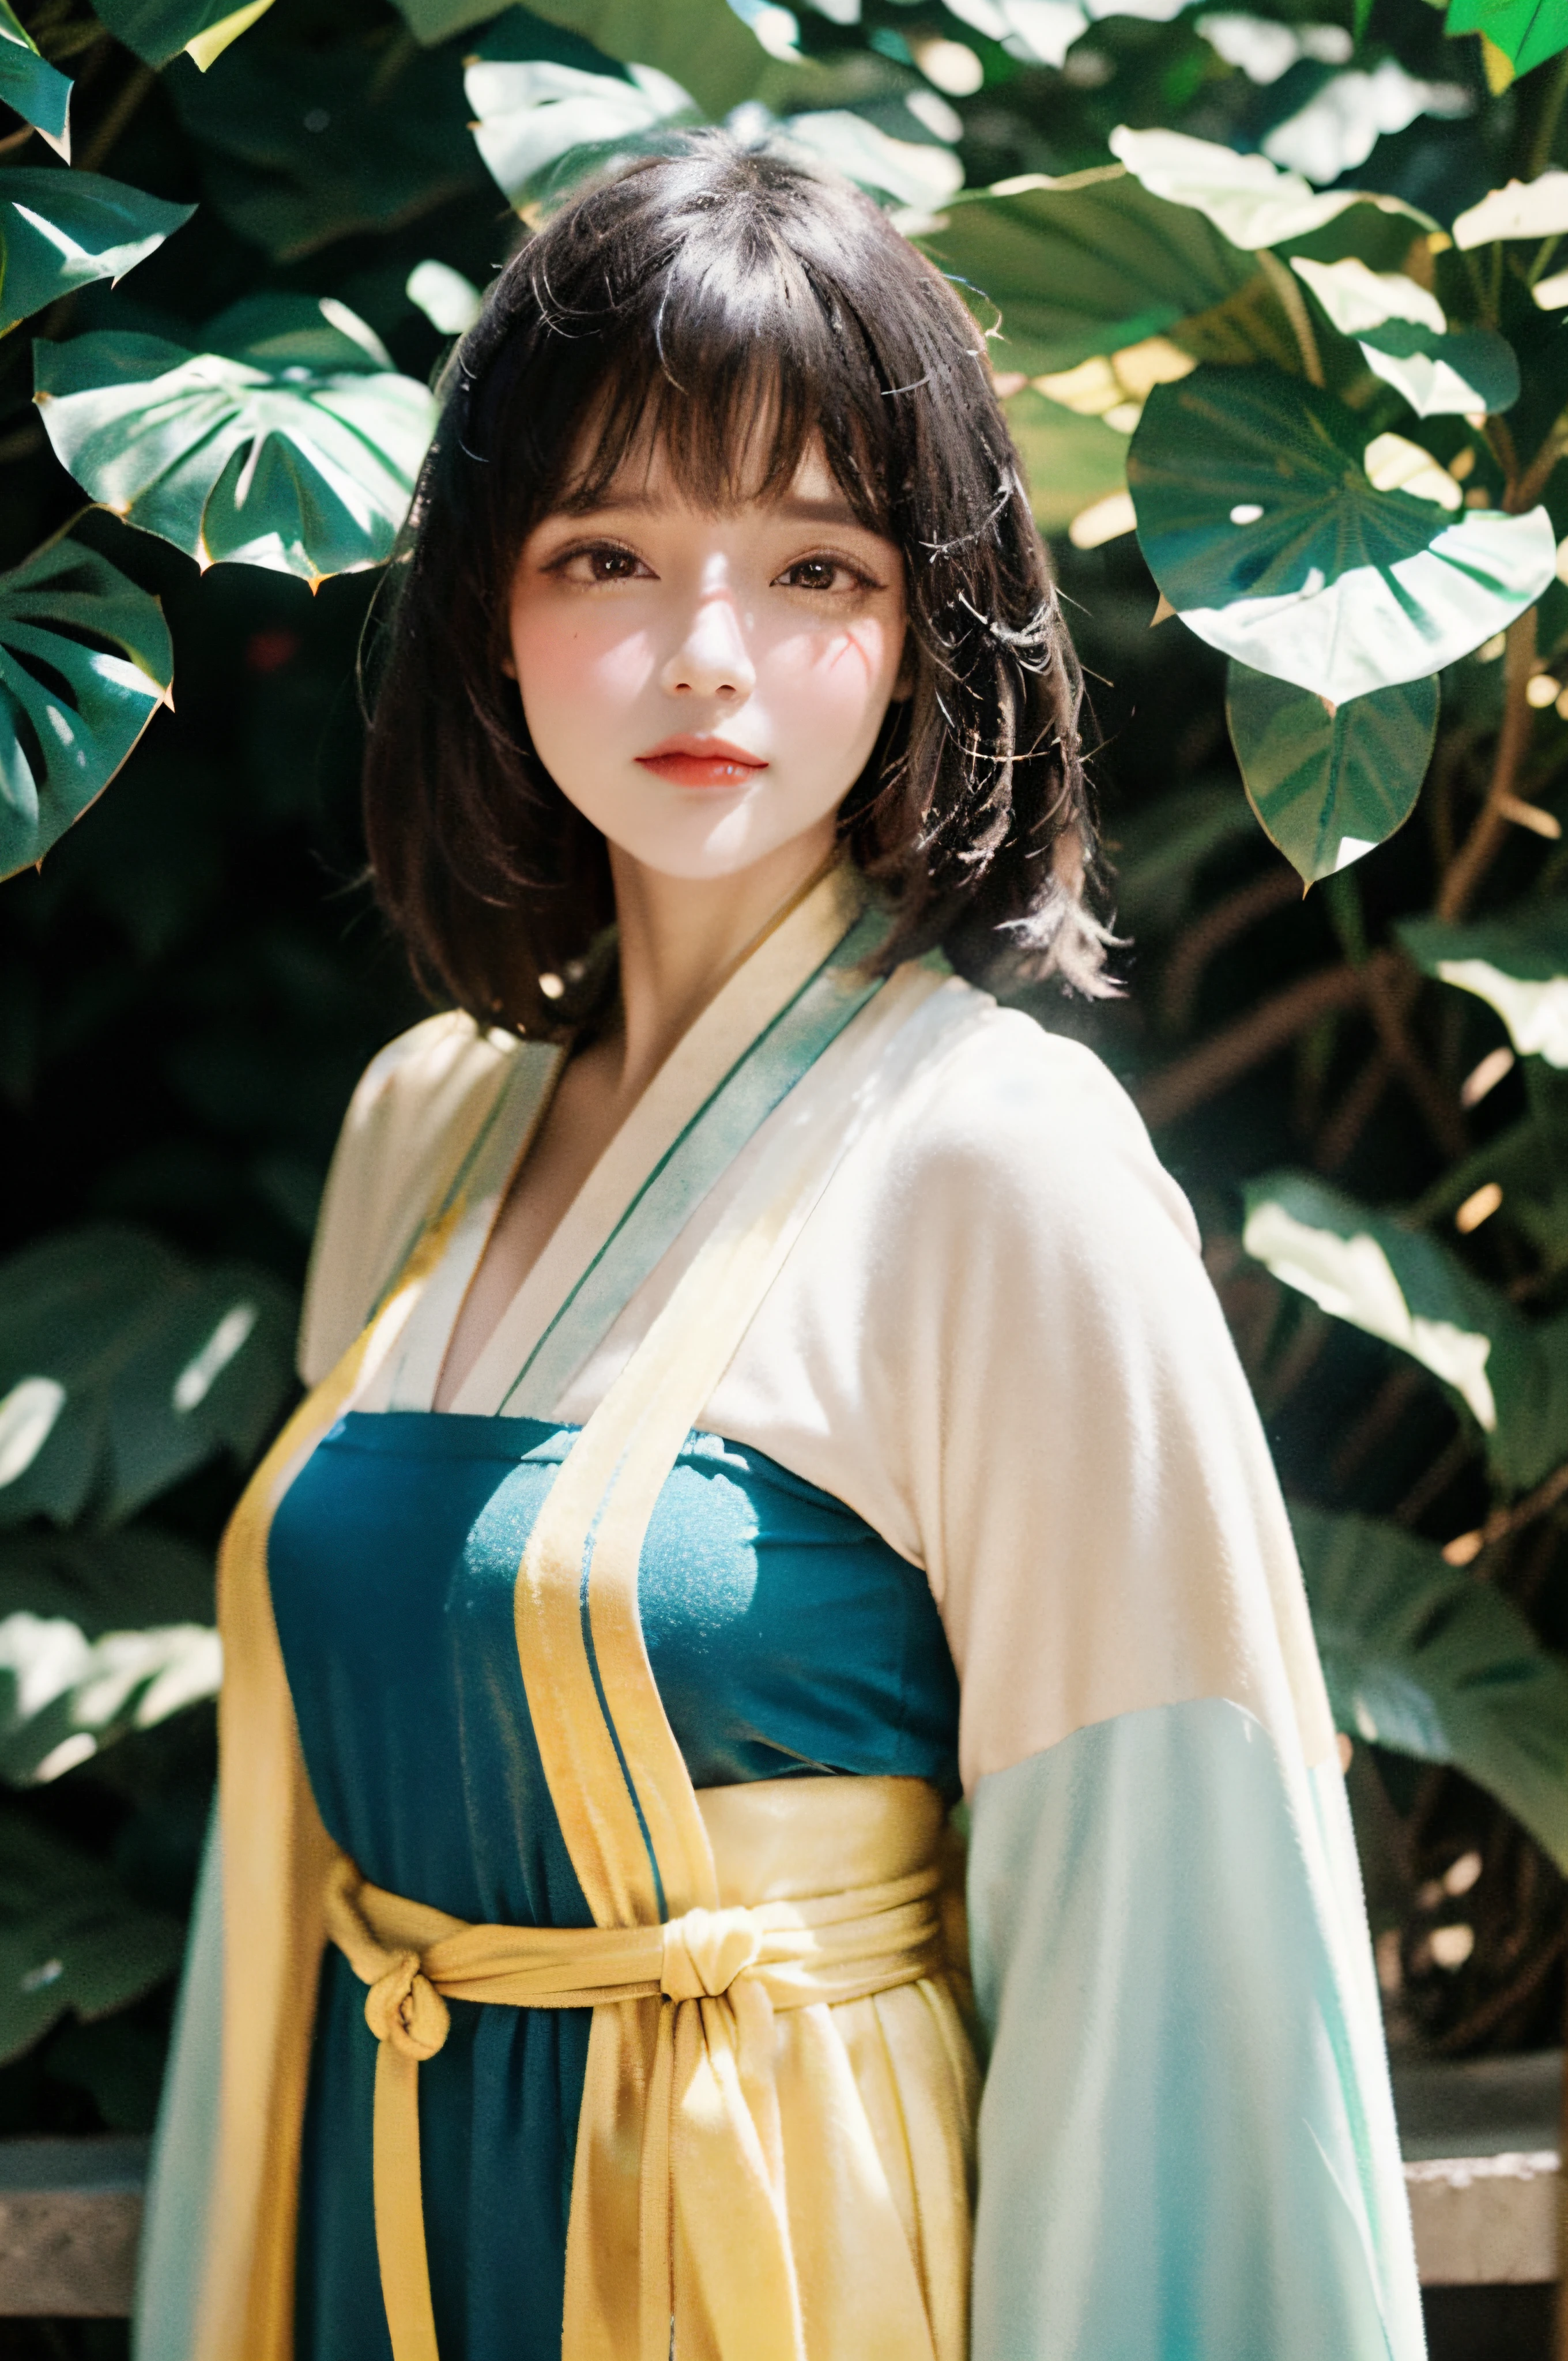 faceRAW, 1 Girl, upper_body, Dynamic Angle,messy_long_hair, Cinematic Light, lens_flare, blue Clothes, Hanfu, Fan, Gold leaf, Monstera,